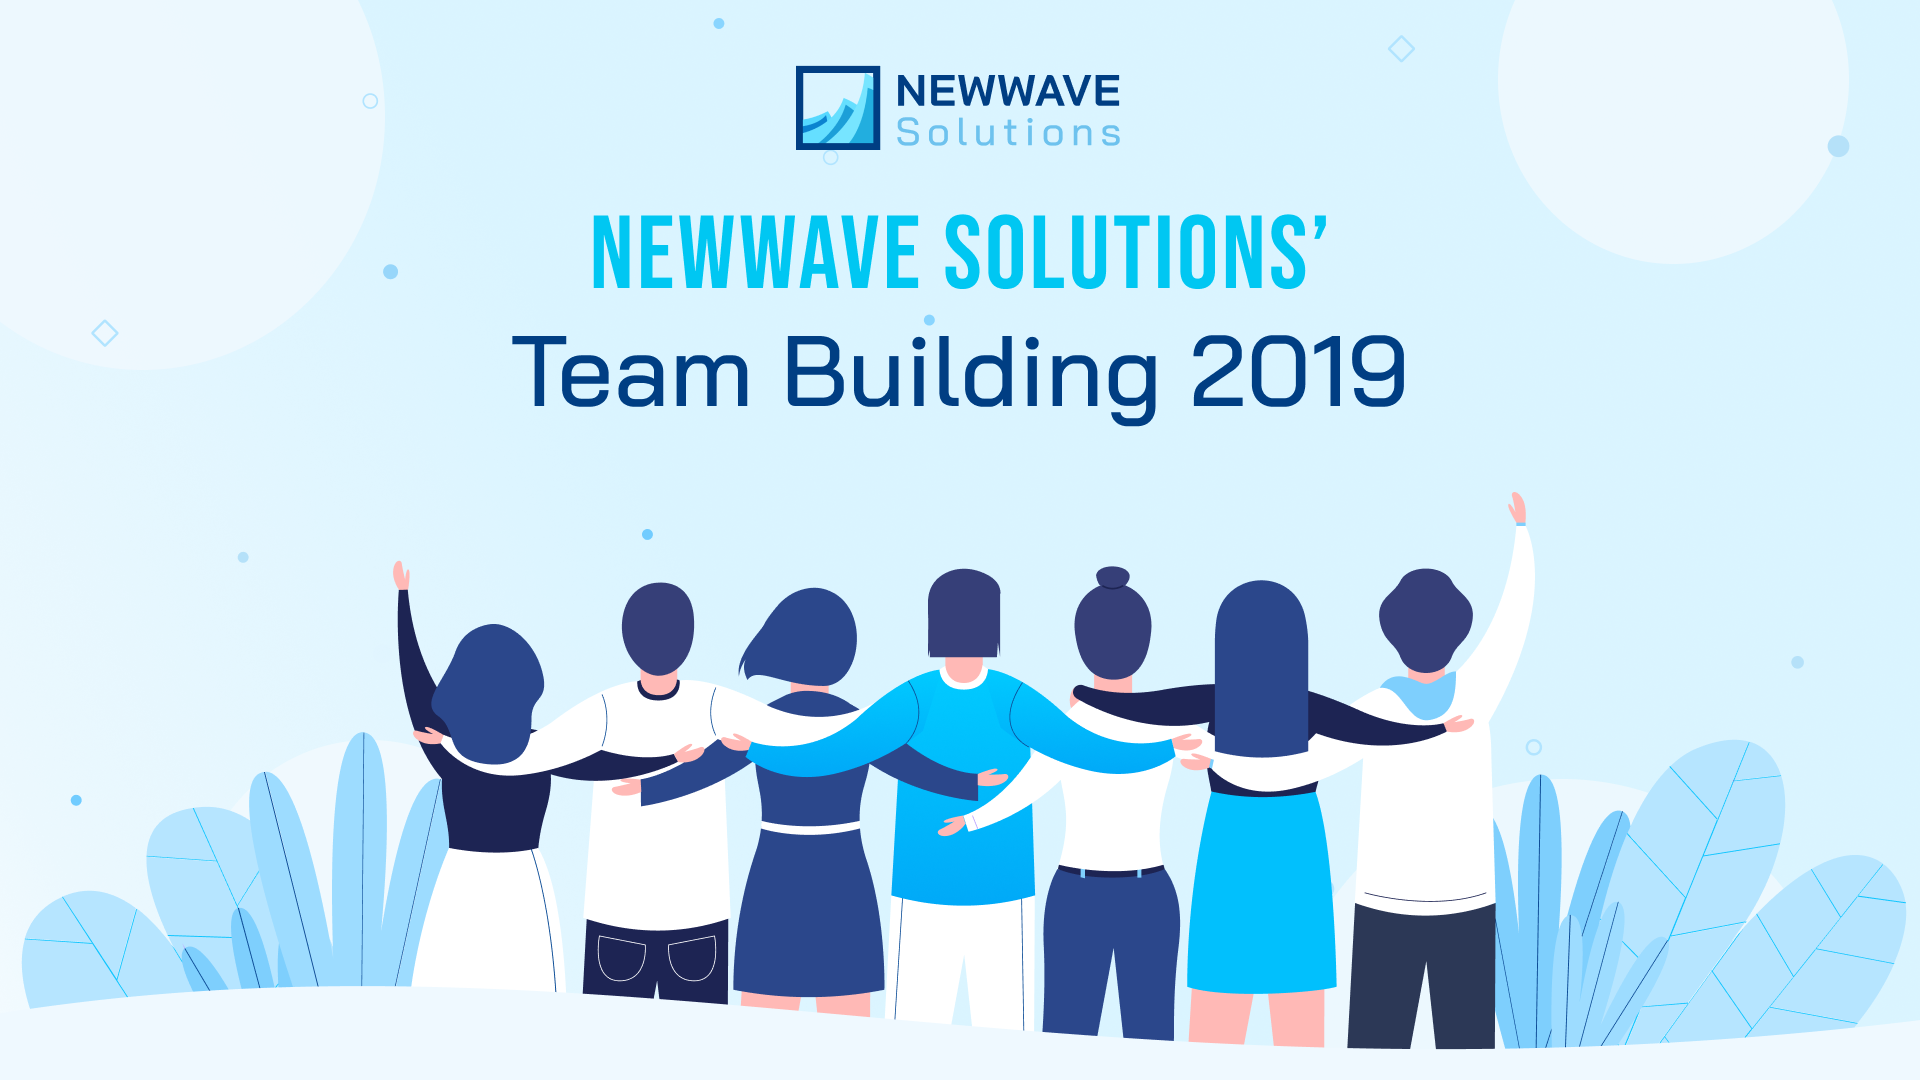 Newwave Solutions' Team Building 2019